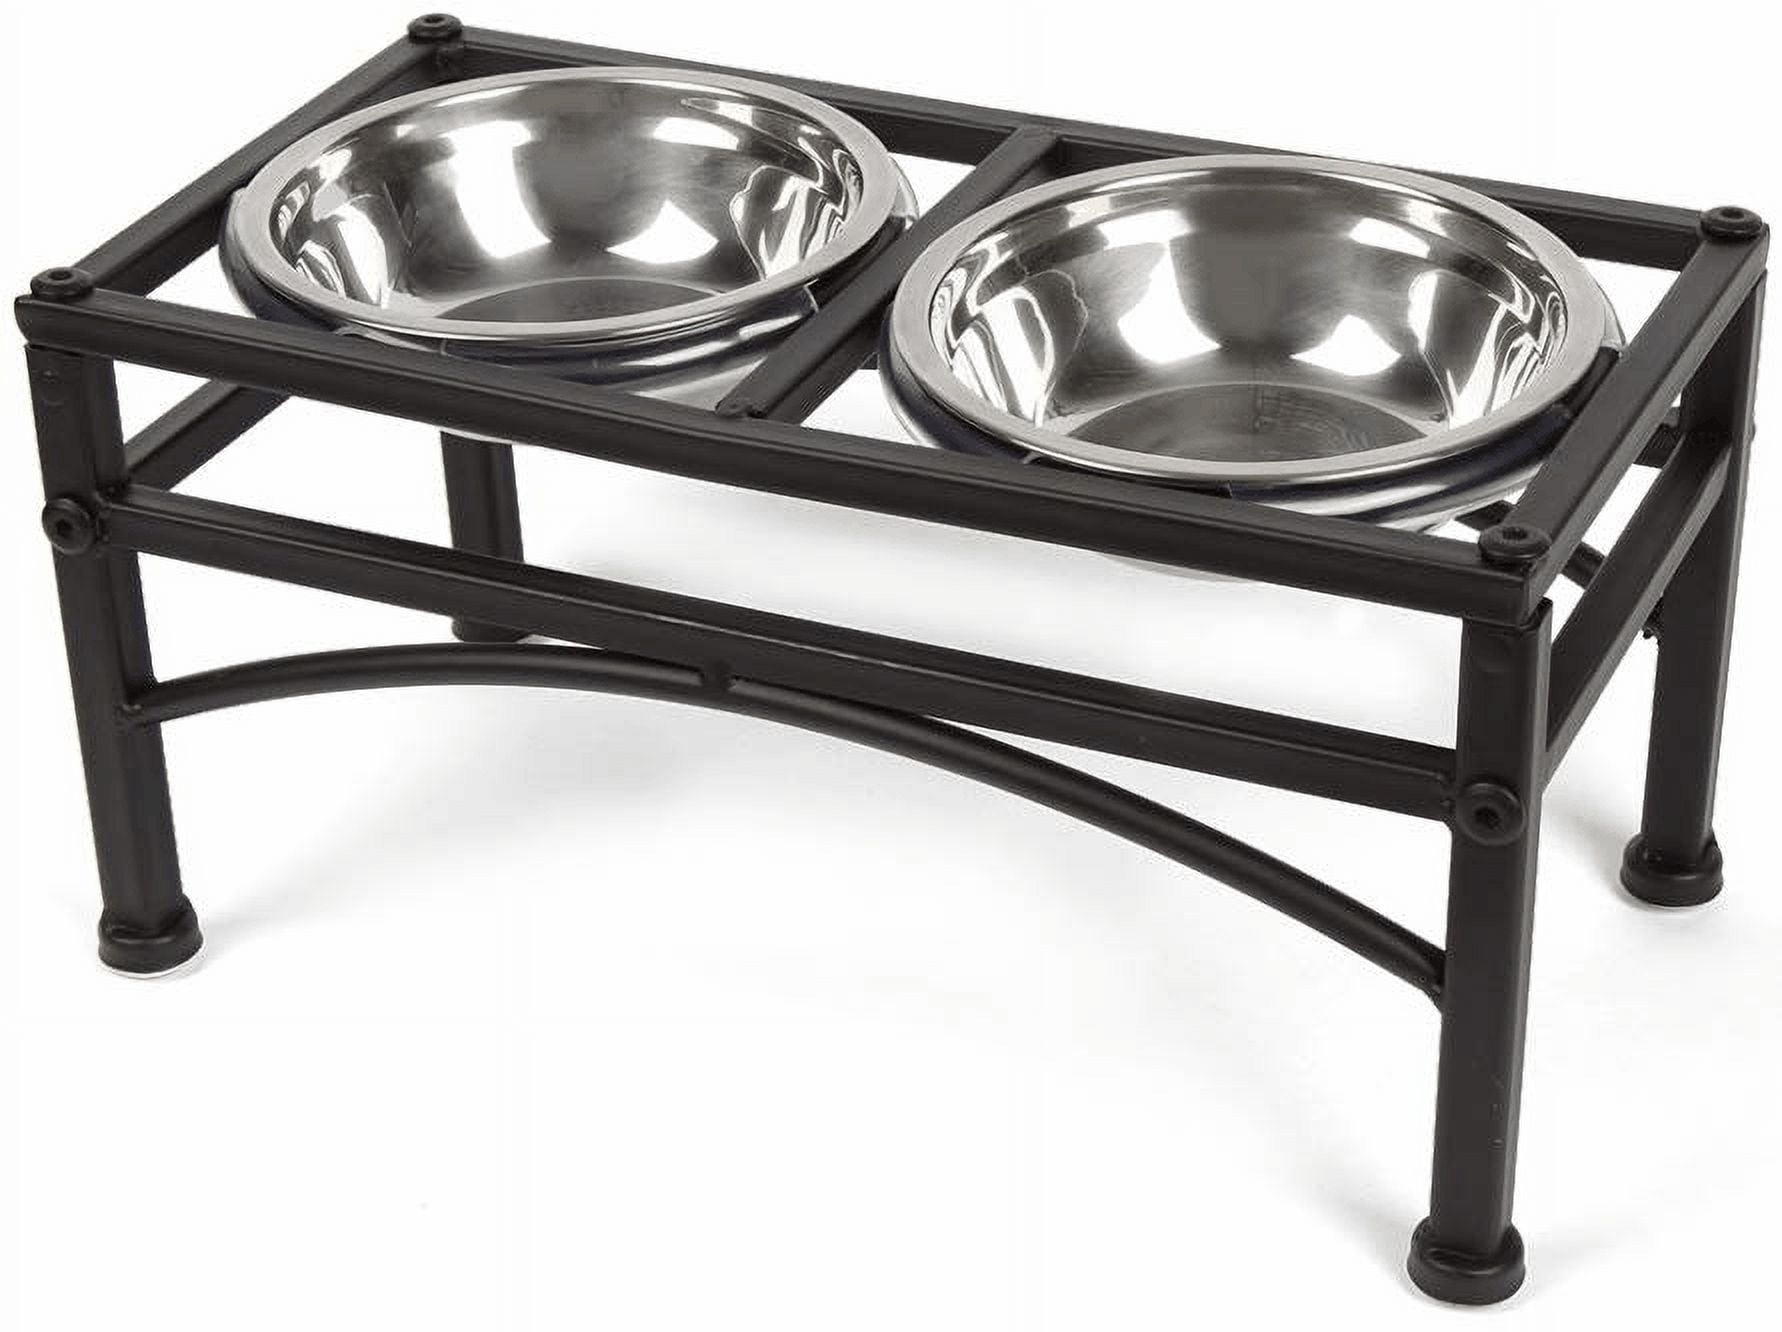 Dripless Water Bowls - Stainless Steel Bowl Unit - for Large Breed Dogs  51-85